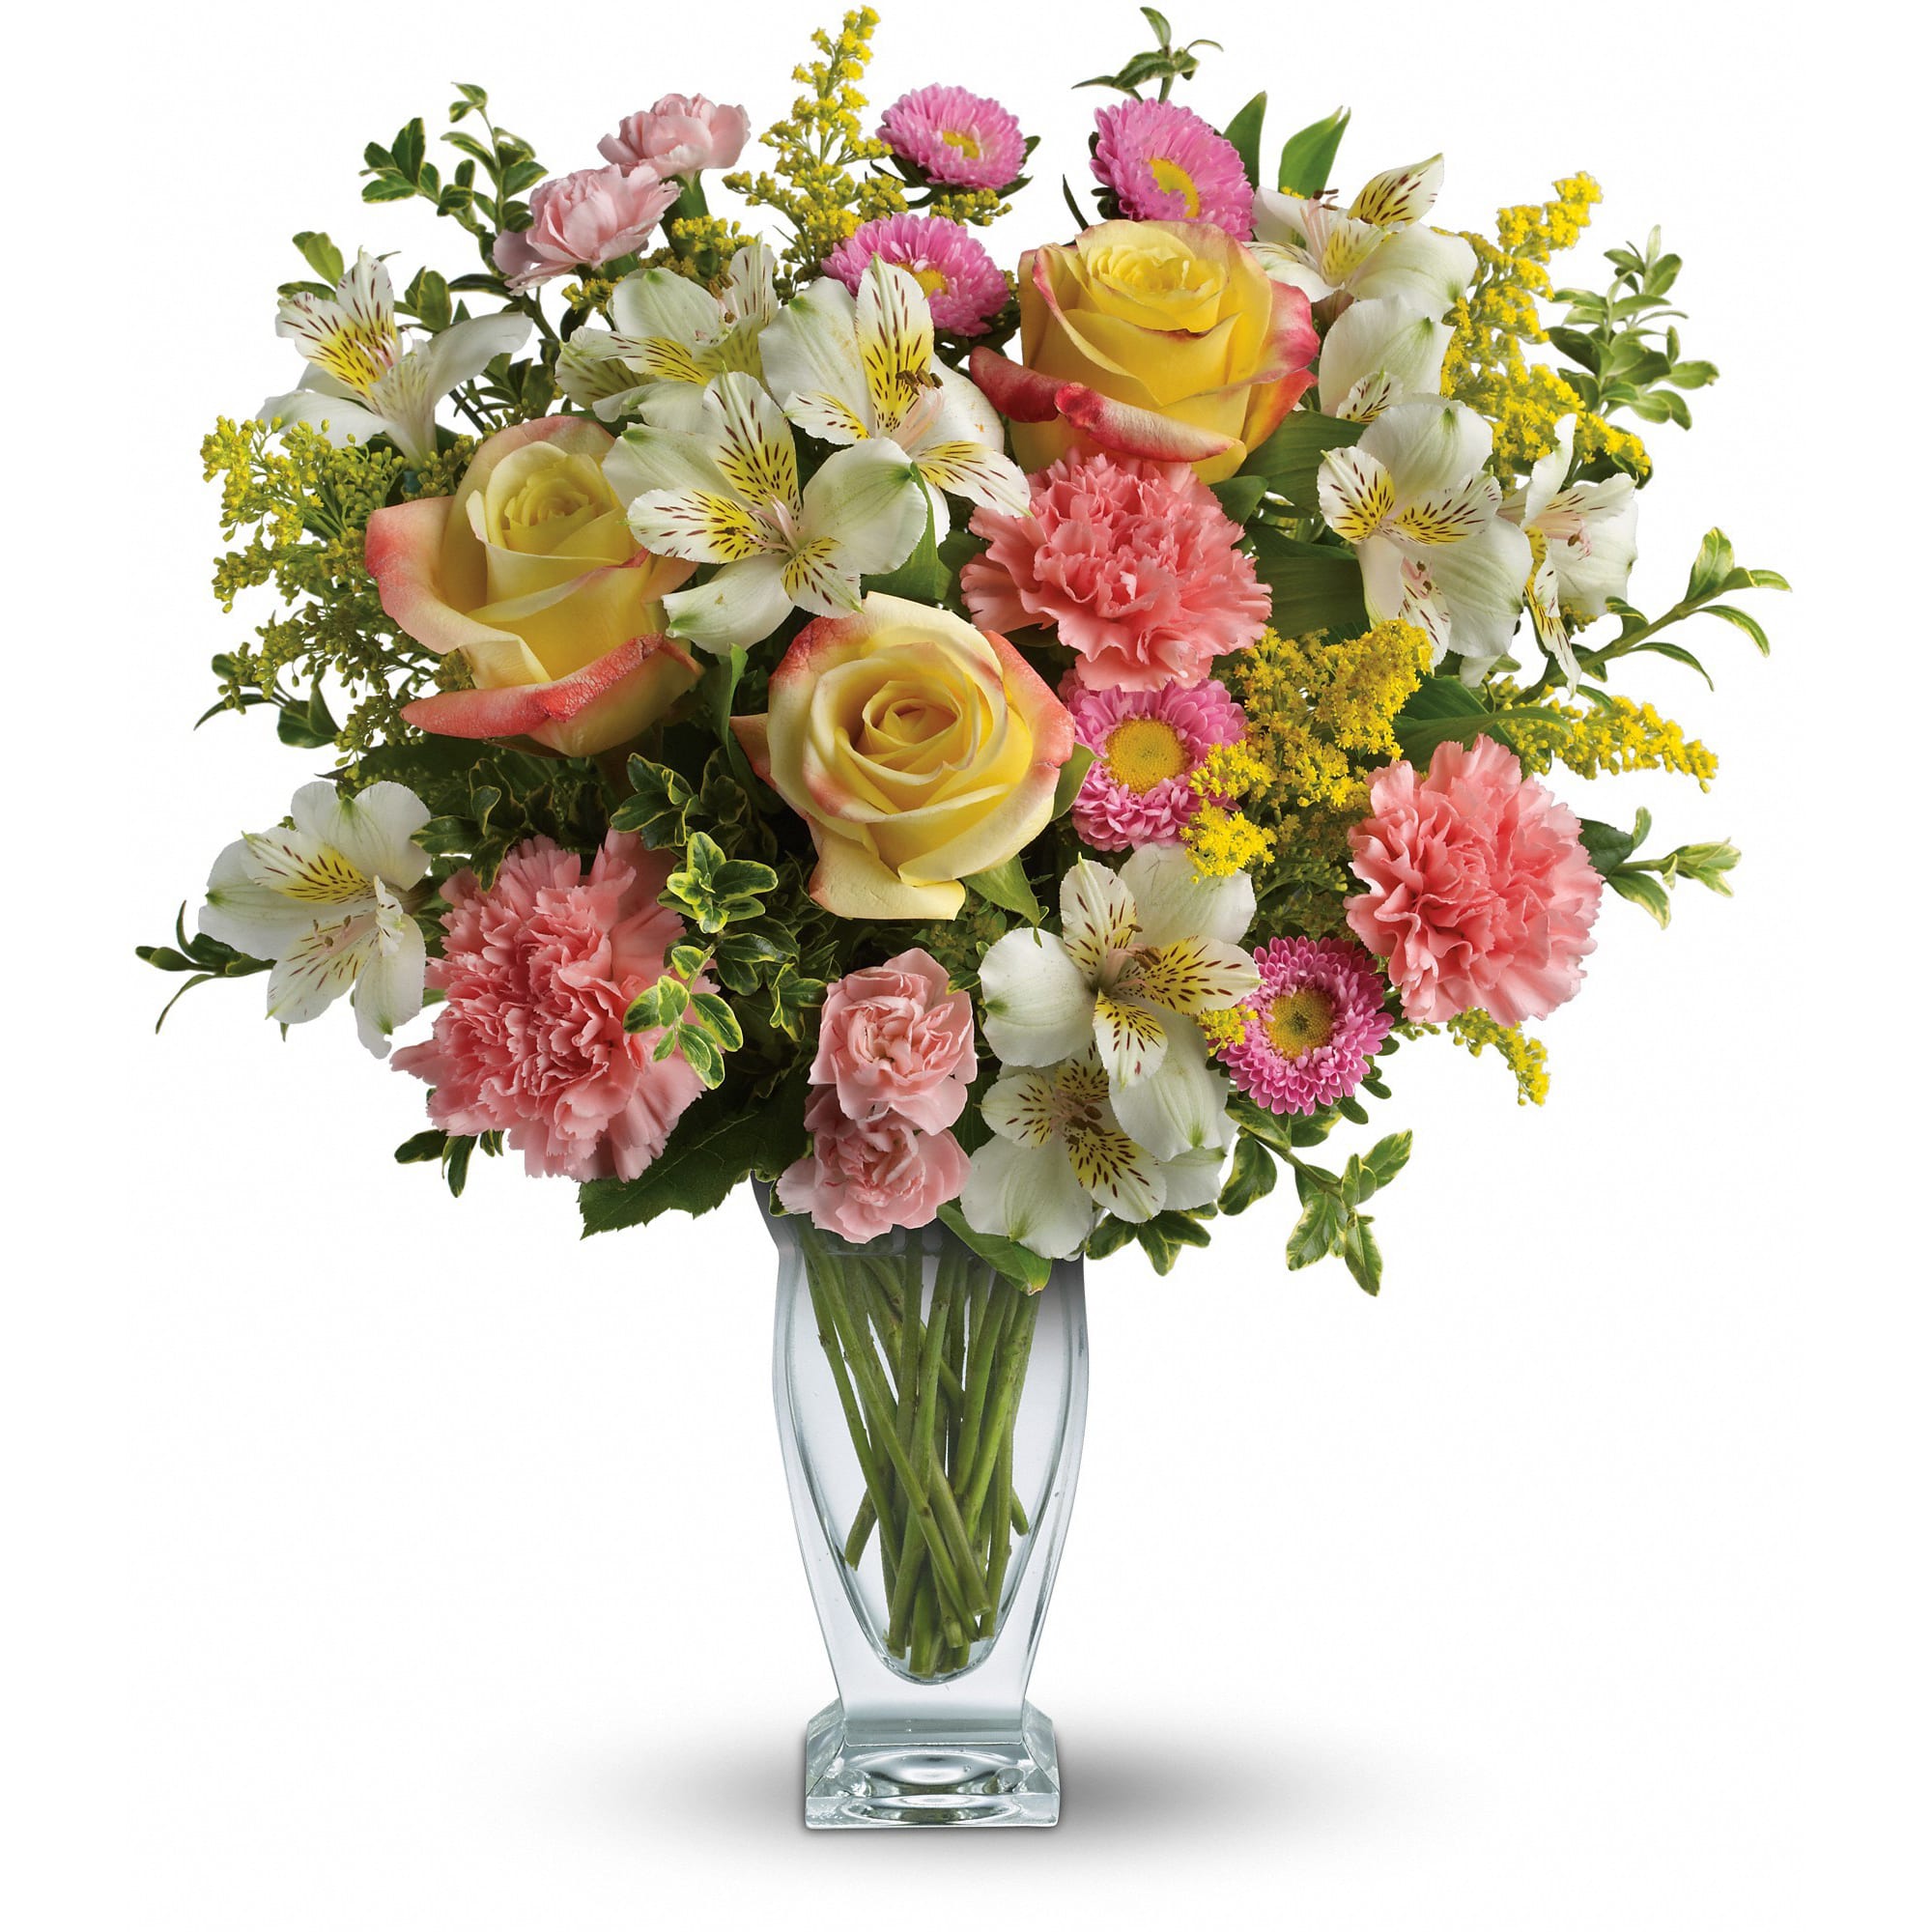 Meant To Be Bouquet by Teleflora - Ring in the spring, celebrate a birthday, or simply show you care with this gorgeously versatile bouquet. Arranged in a stunning vase they'll always treasure, this lovely mix of yellow roses and pink carnations warms everyone's heart.